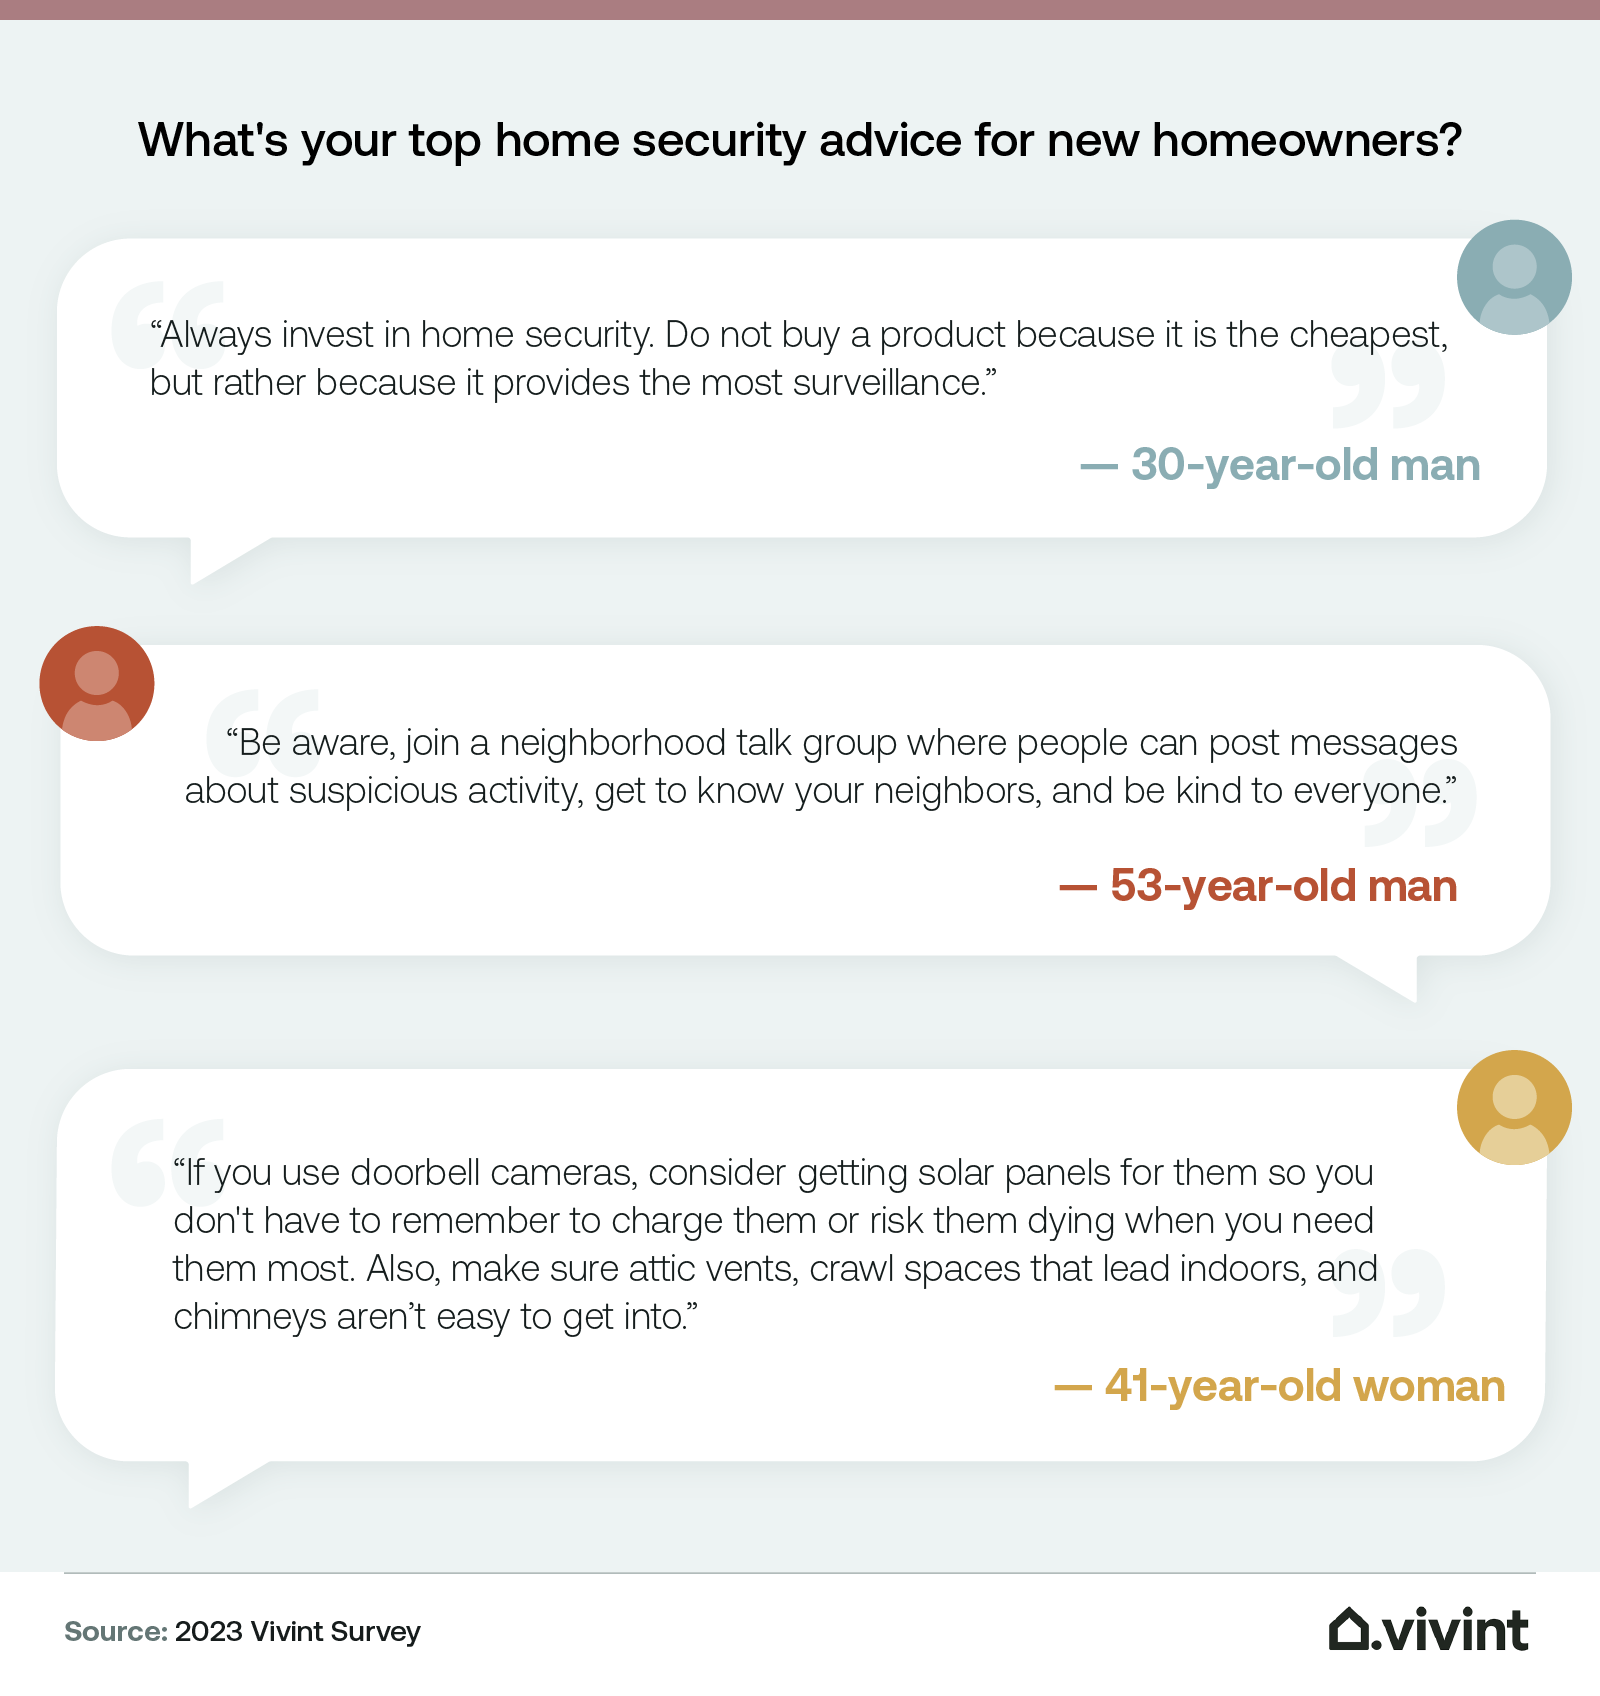 Quotes from survey-takers about their top security advice for new homeowners.